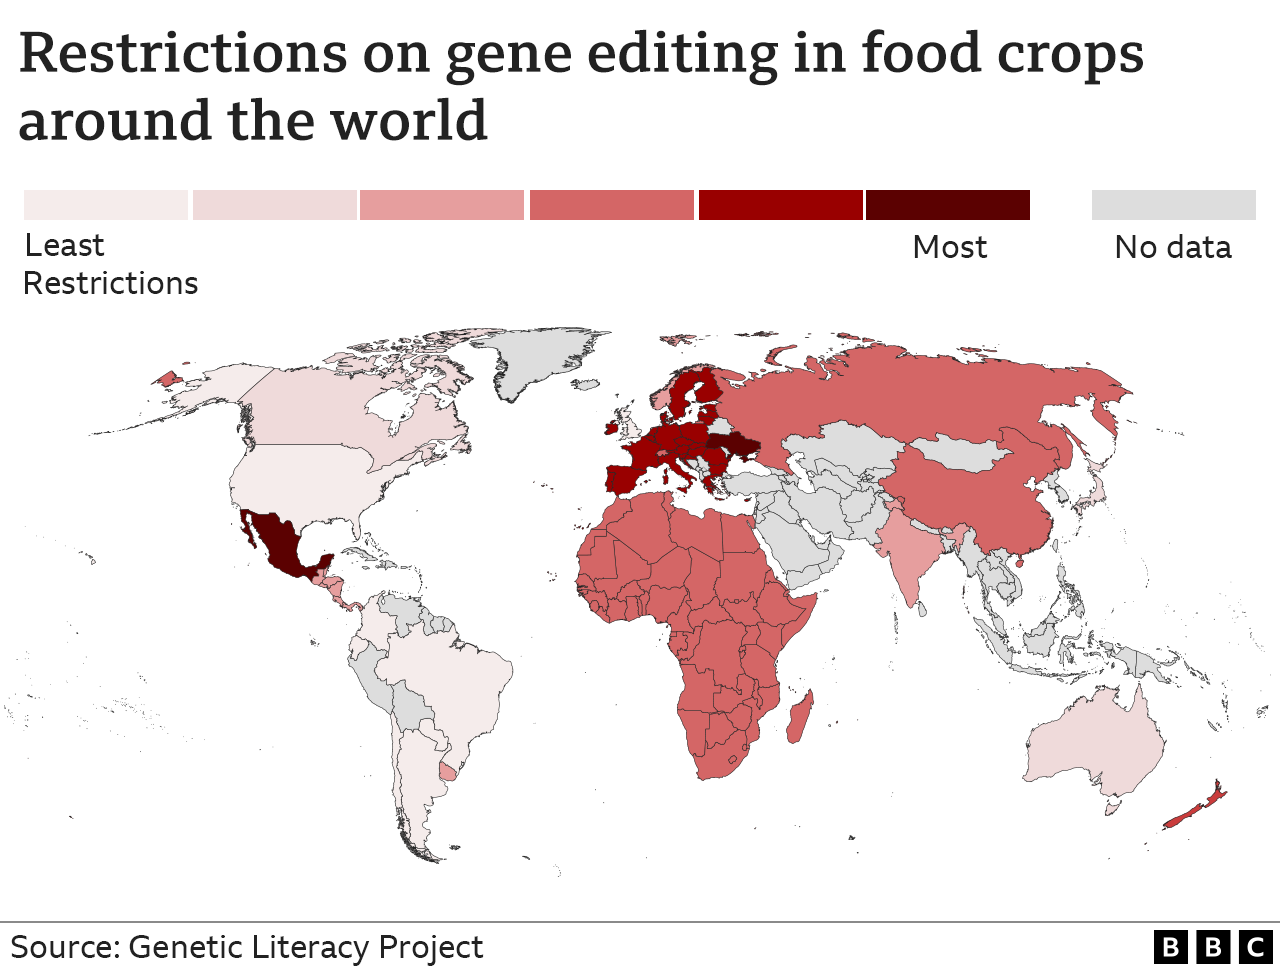 Map showing restrictions on gene editing in food crops around the world